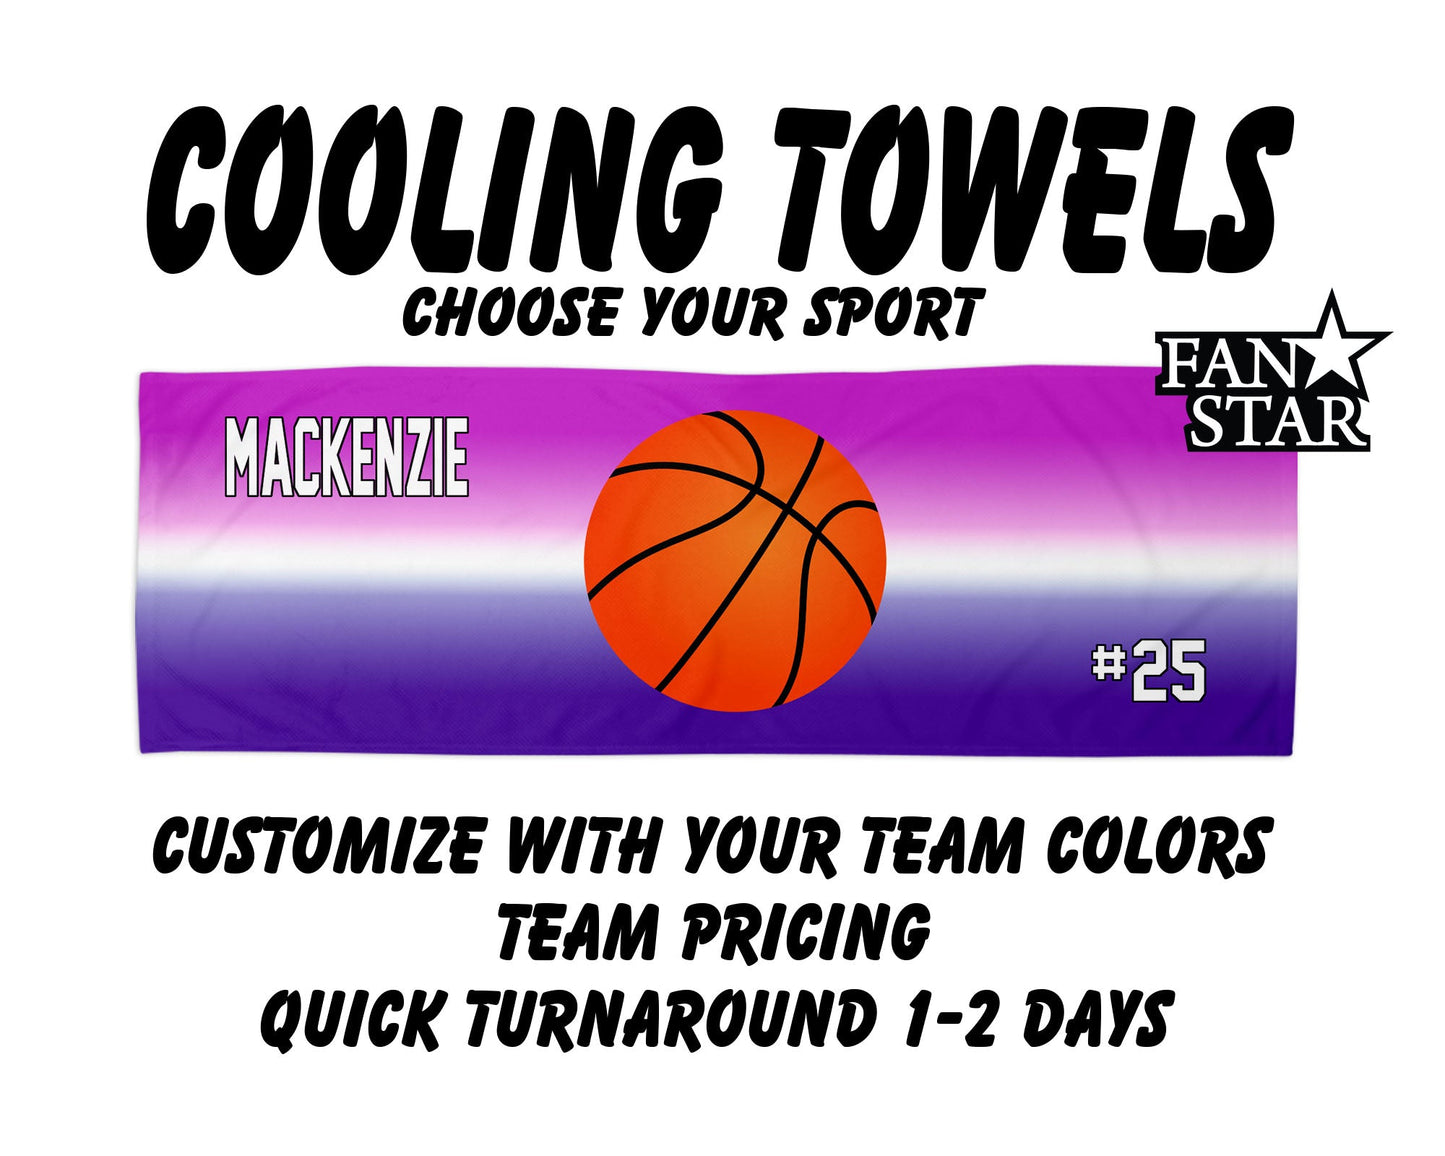 Lacrosse Cooling Towel with Ombre Background